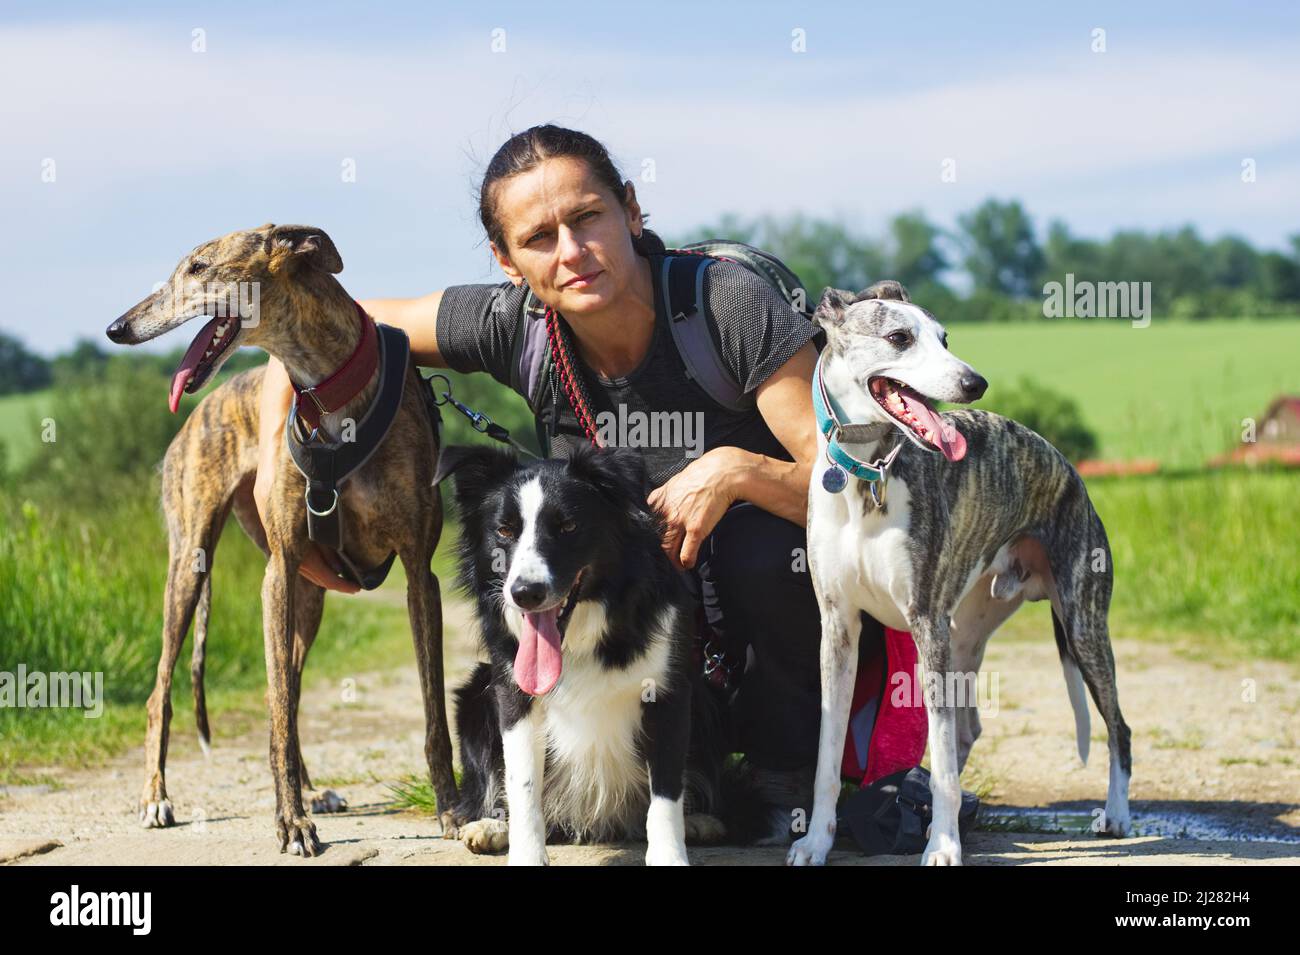 Owner on a walk with her dogs. Portarit of woman withe her dog pack in nature. Animal trainer Stock Photo